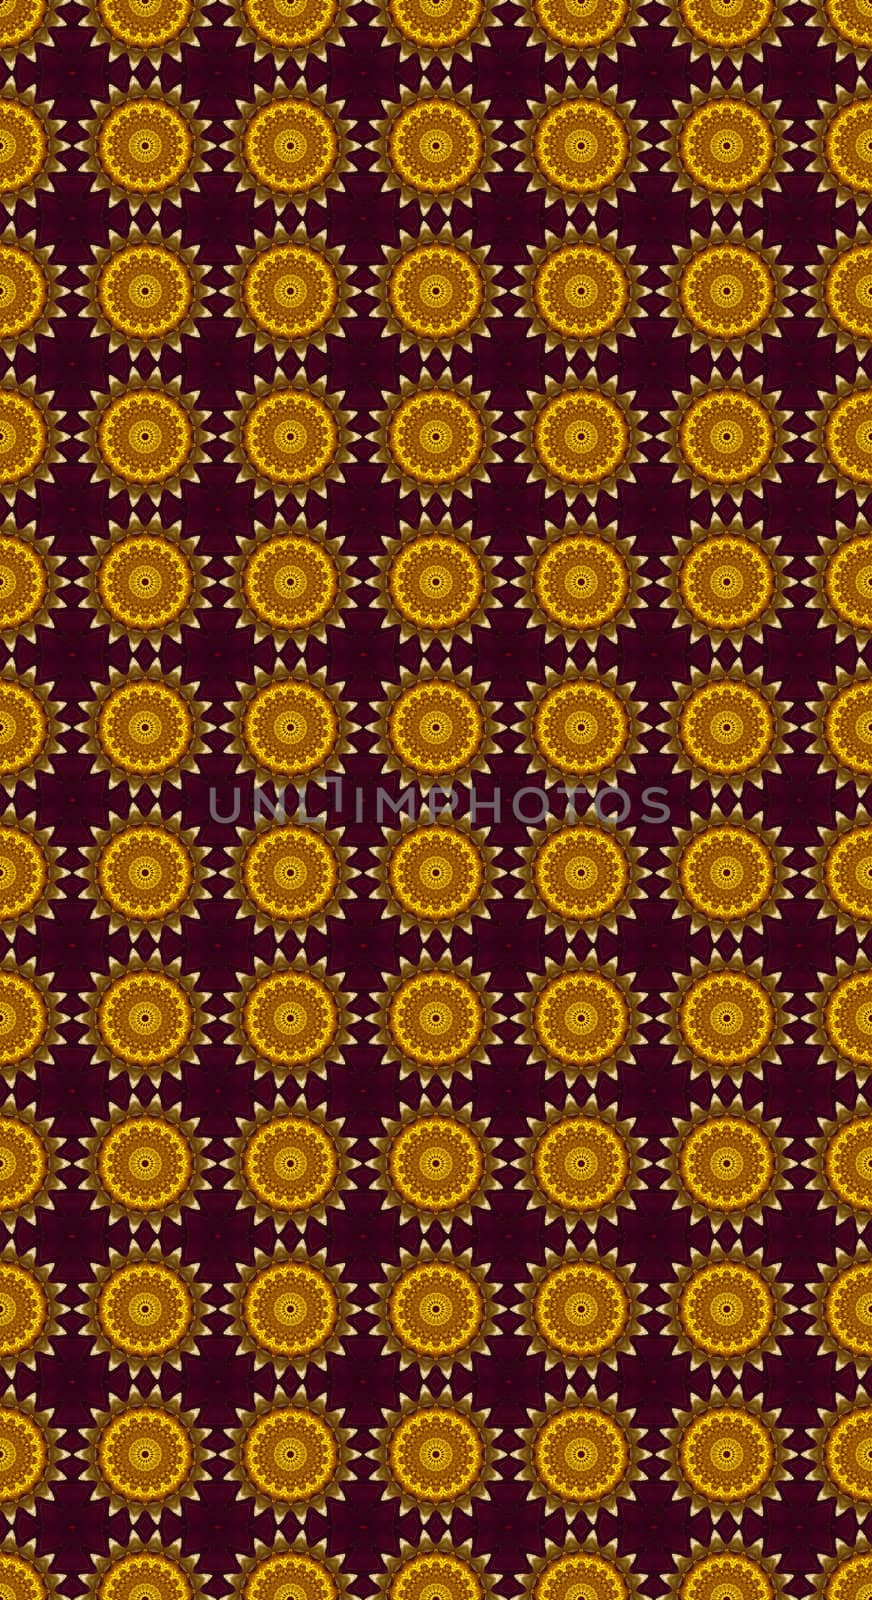 Seamless pattern of golden suns on red background